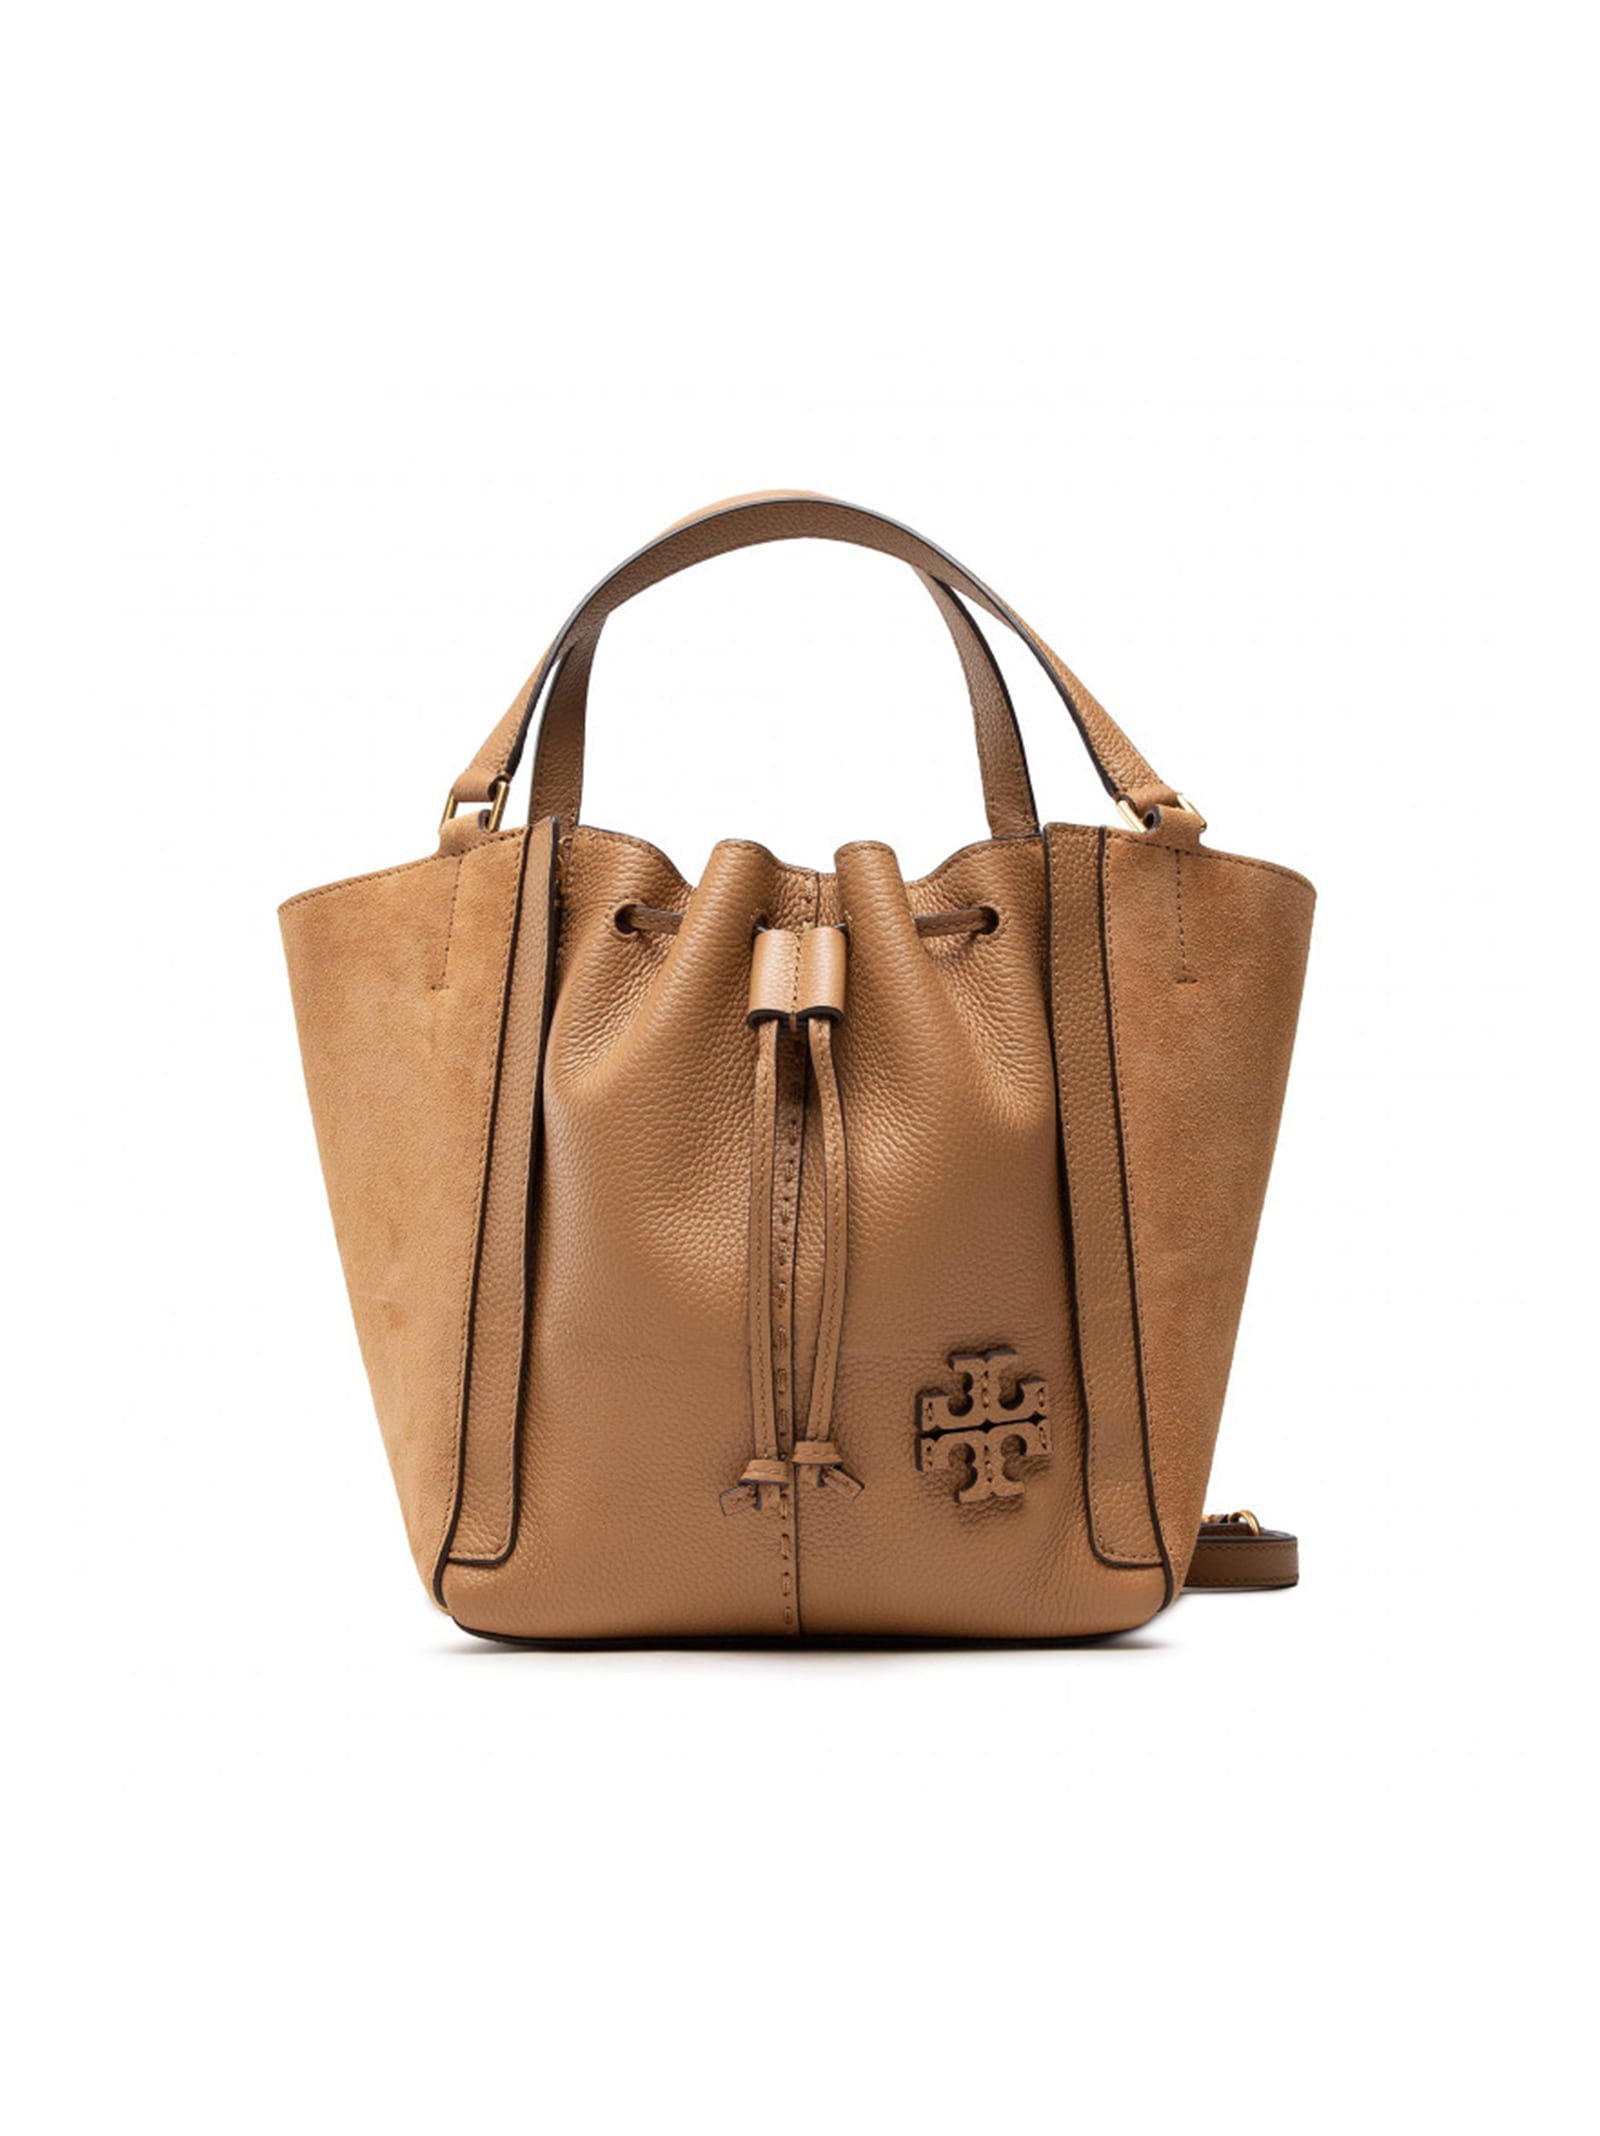 Tory Burch Leather Bag With Laces